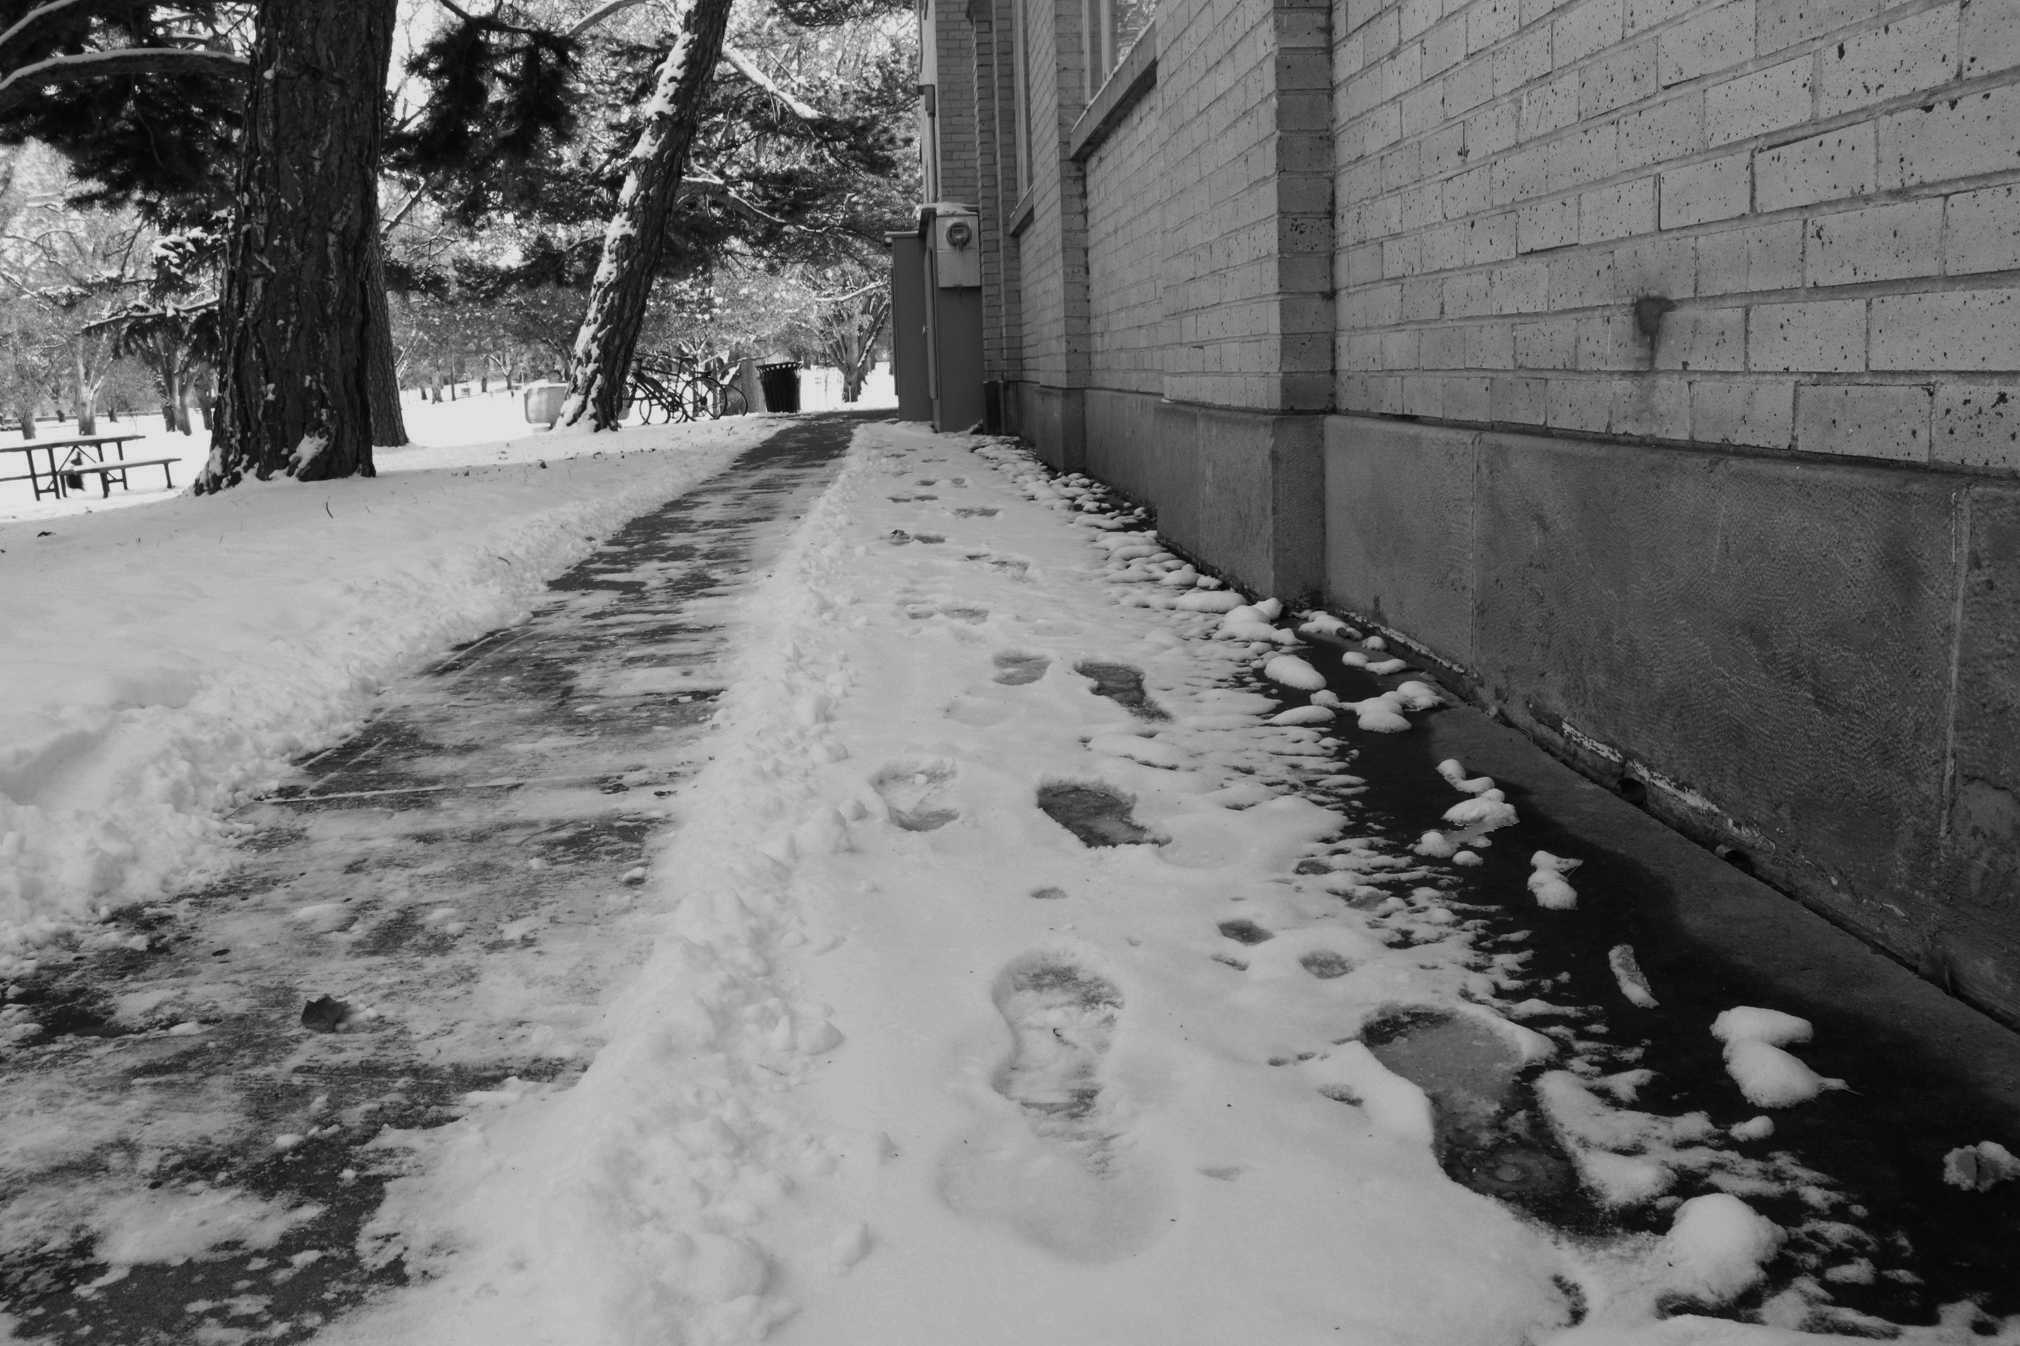 footprints in snow along pathway next to building